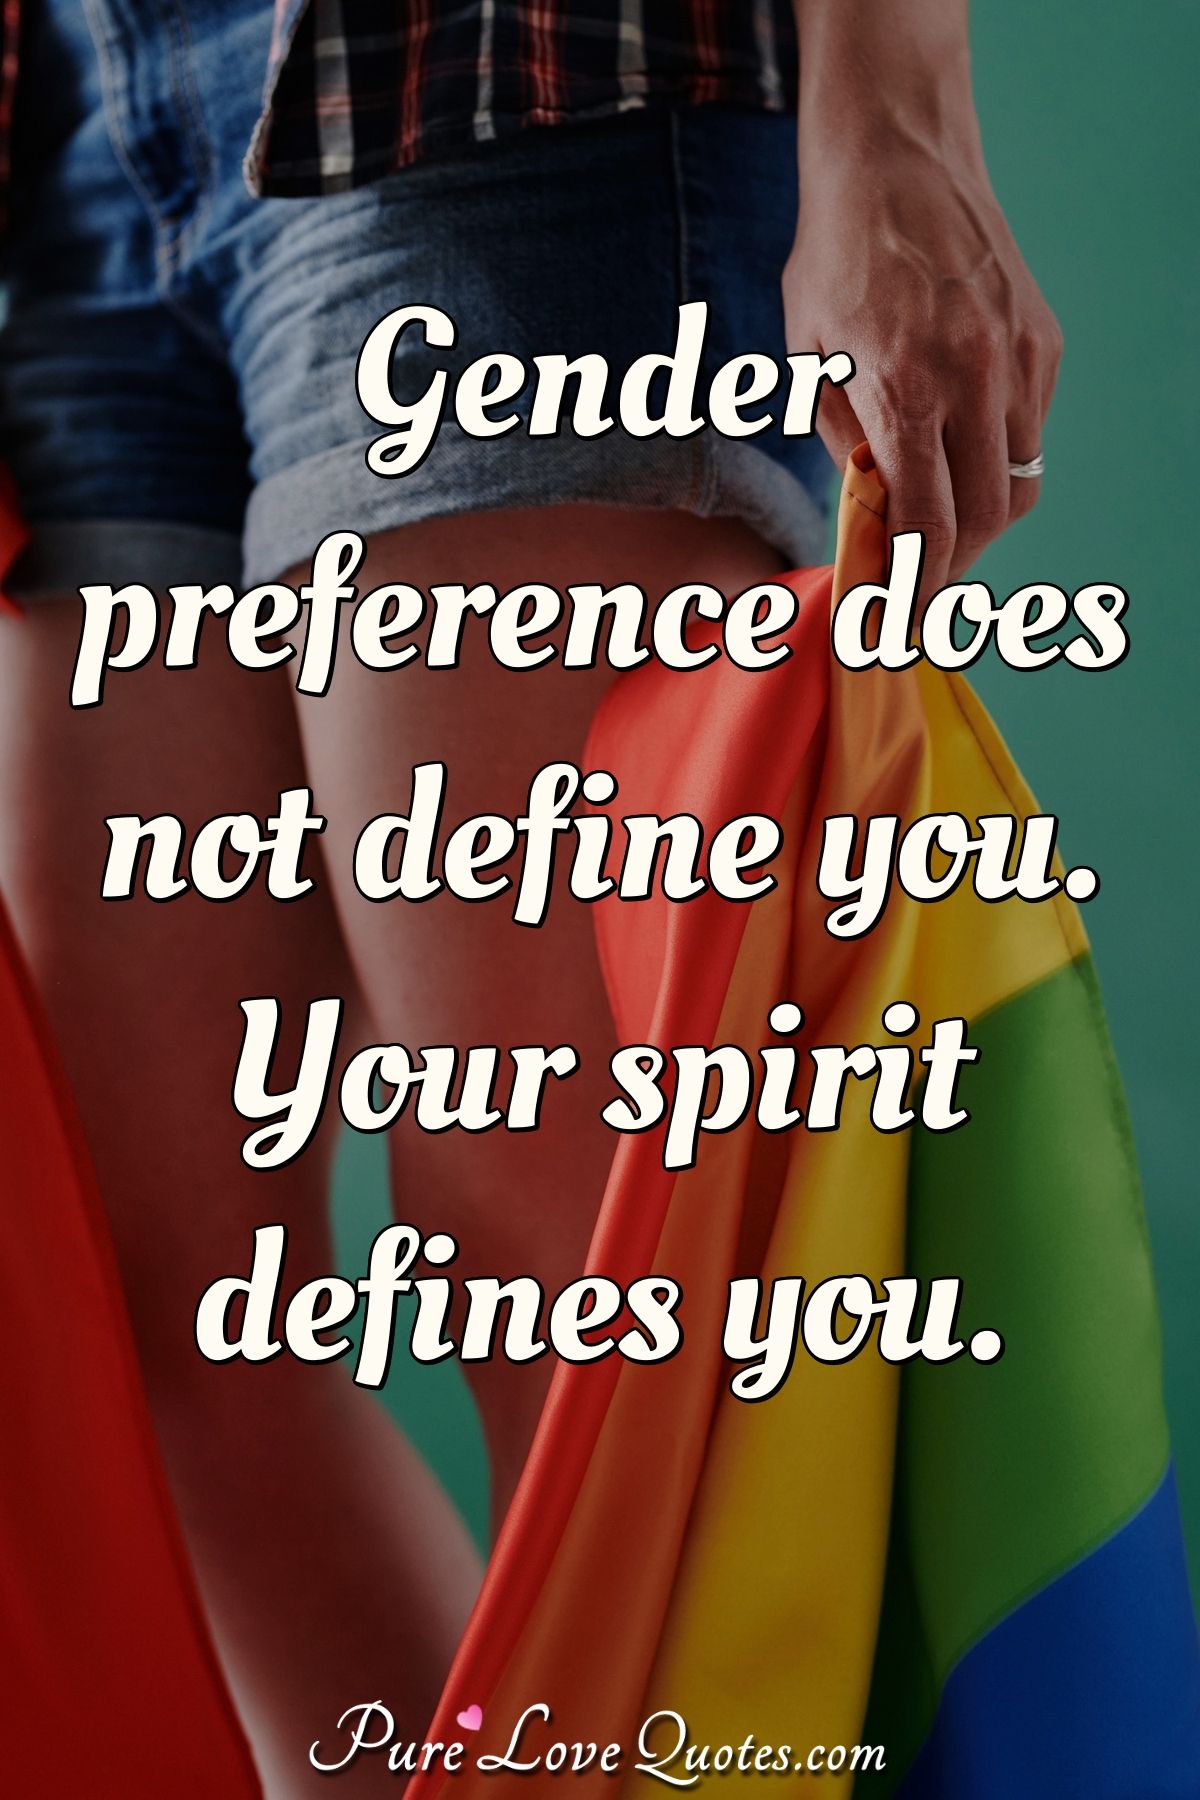 Gender preference does not define you. Your spirit defines you. - Anonymous